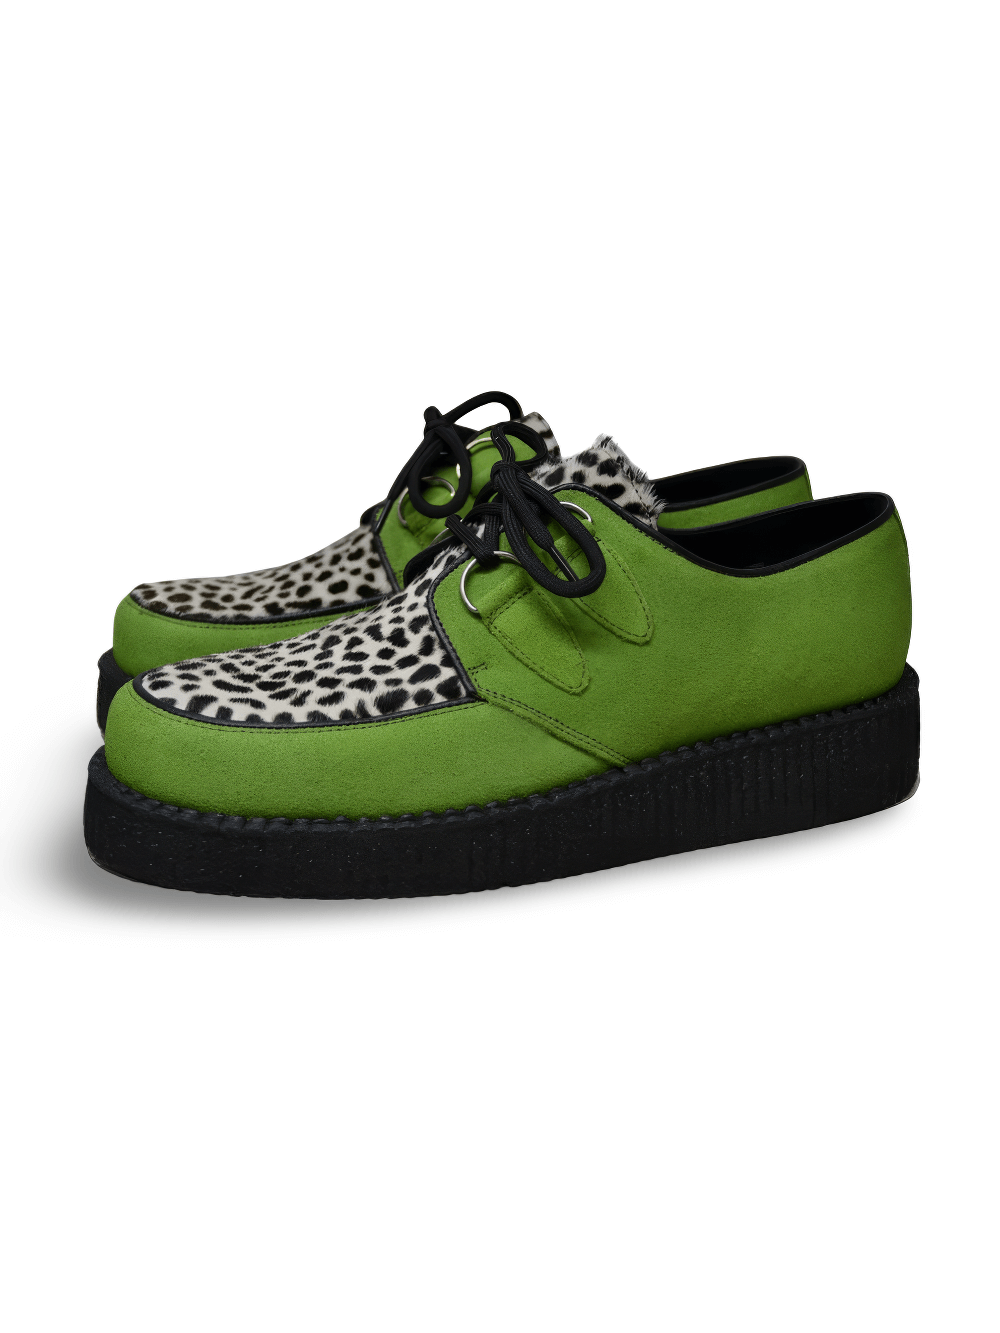 Unisex Green Suede Creepers with Leopard Print